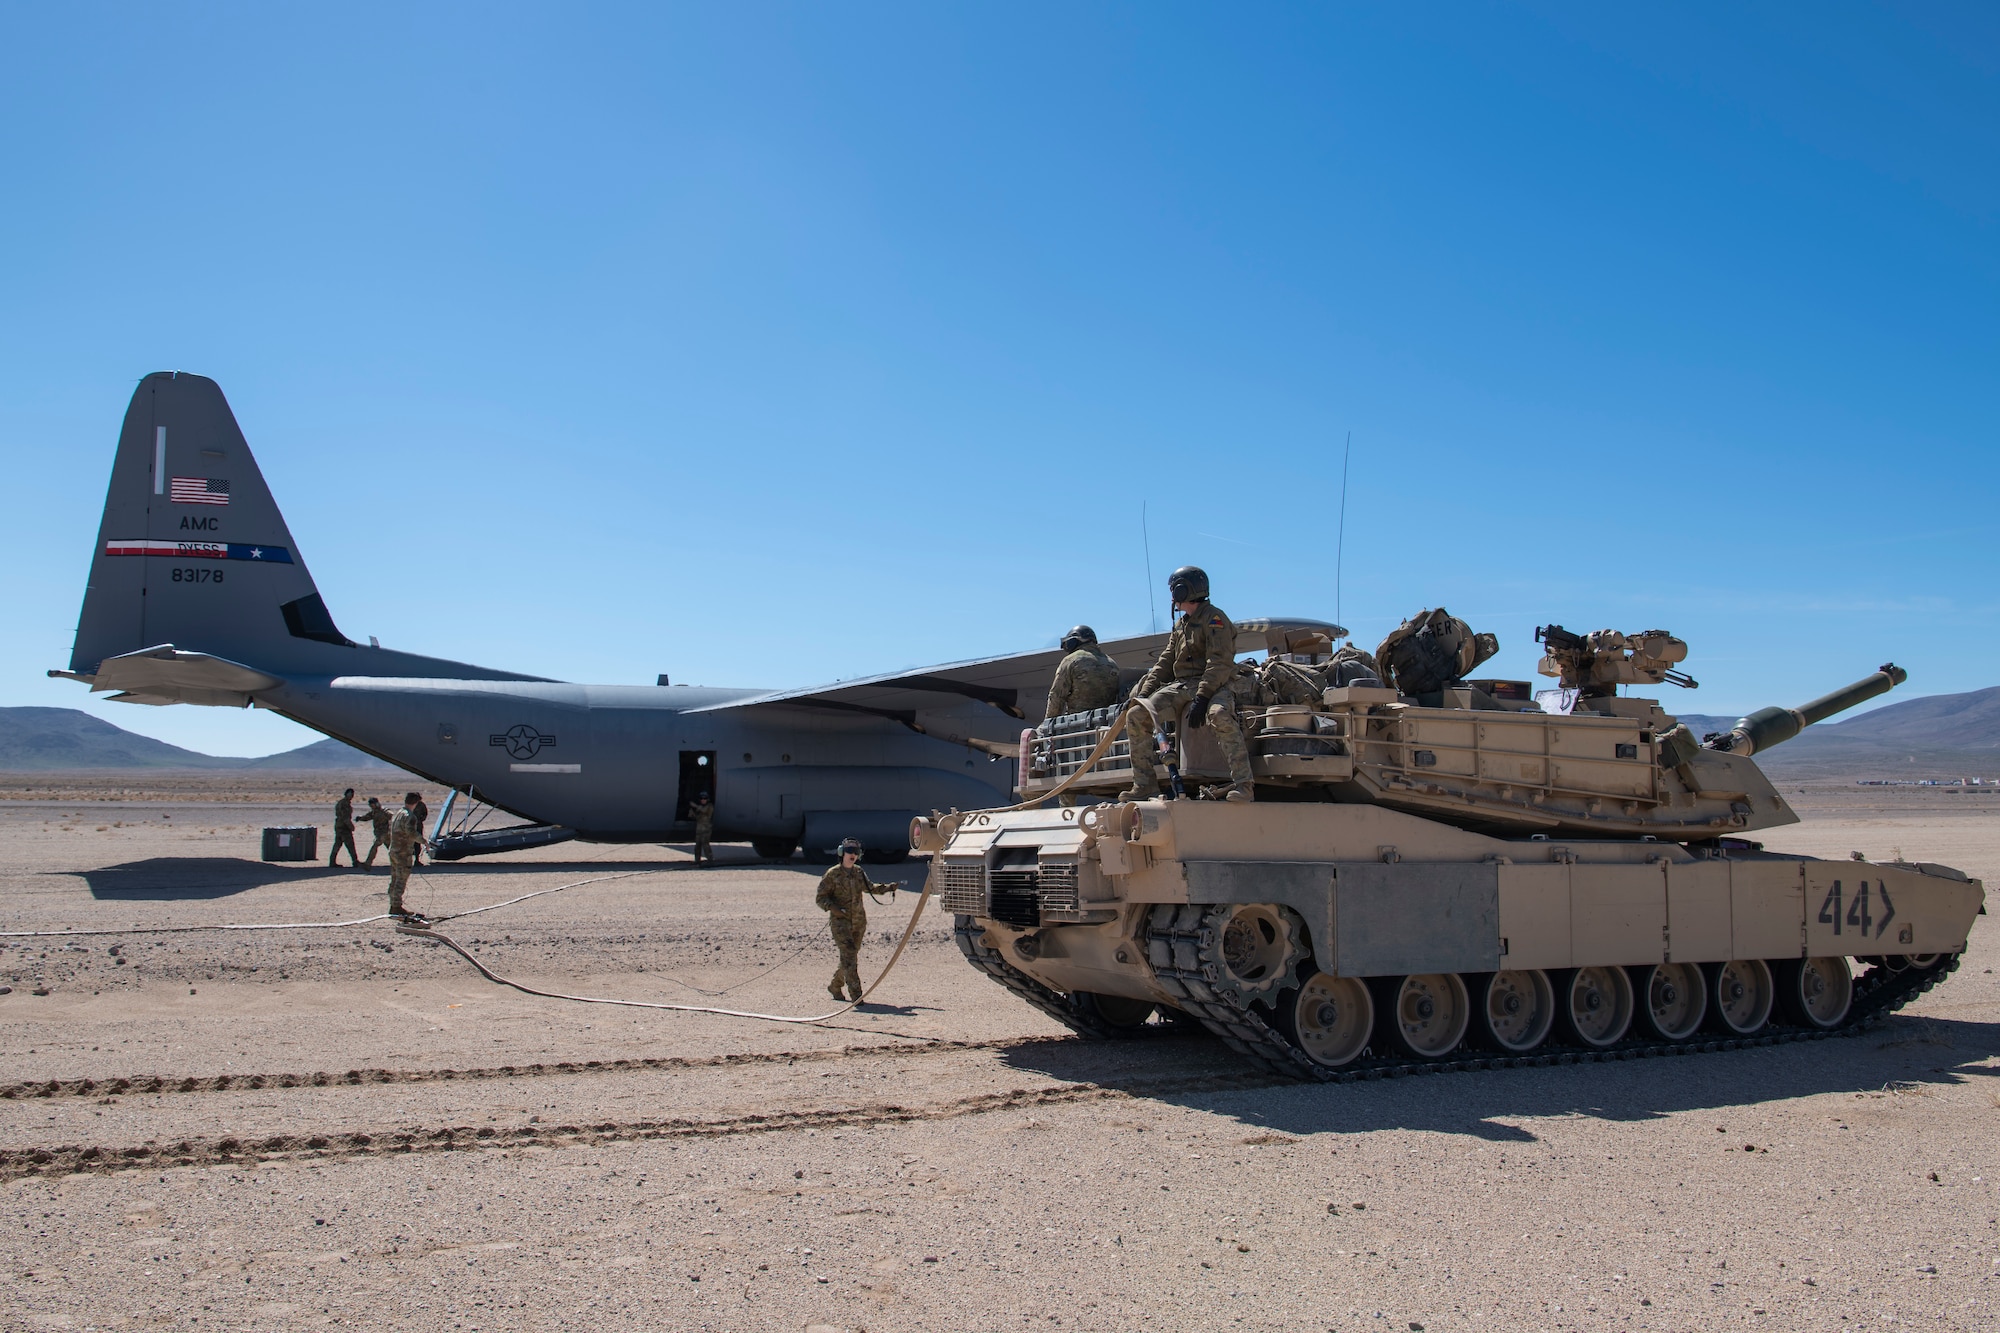 U.S. Army Soldiers from the 1st Armored Division and U.S. Air Force Airmen from the 317th Airlift Wing refuel an M1A2 Abrams tank from a C-130J Super Hercules during Operation Night King  in the California desert March 26, 2023.